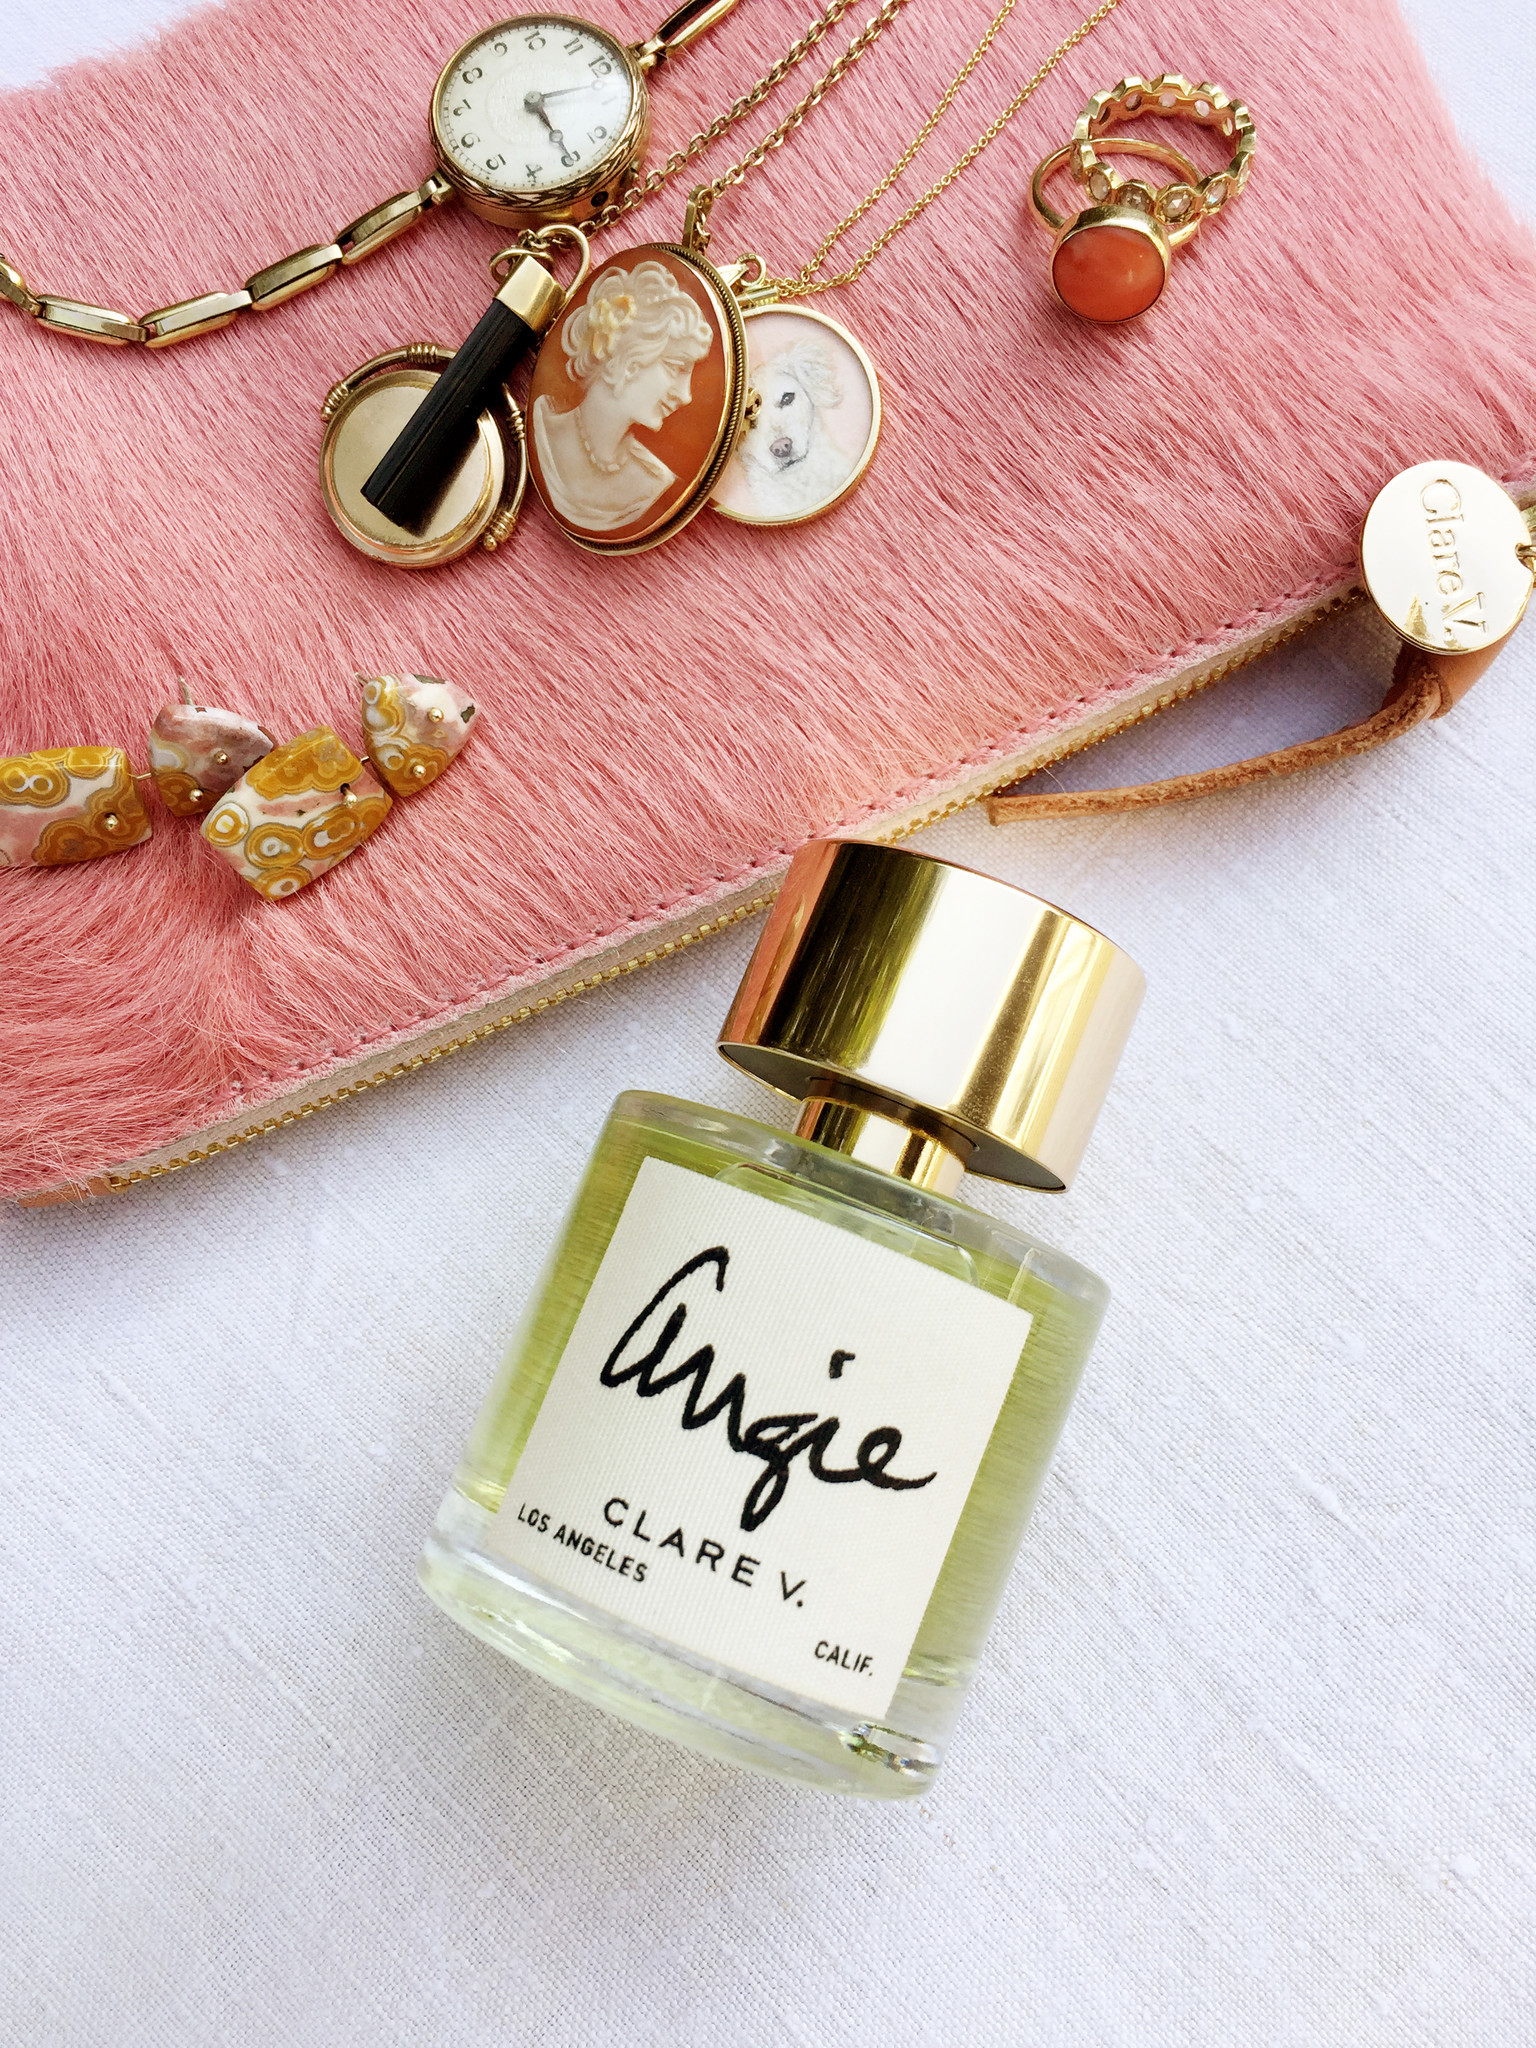 Angie, Clare Vivier's first fragrance, bears her middle name and the moniker her family calls her.